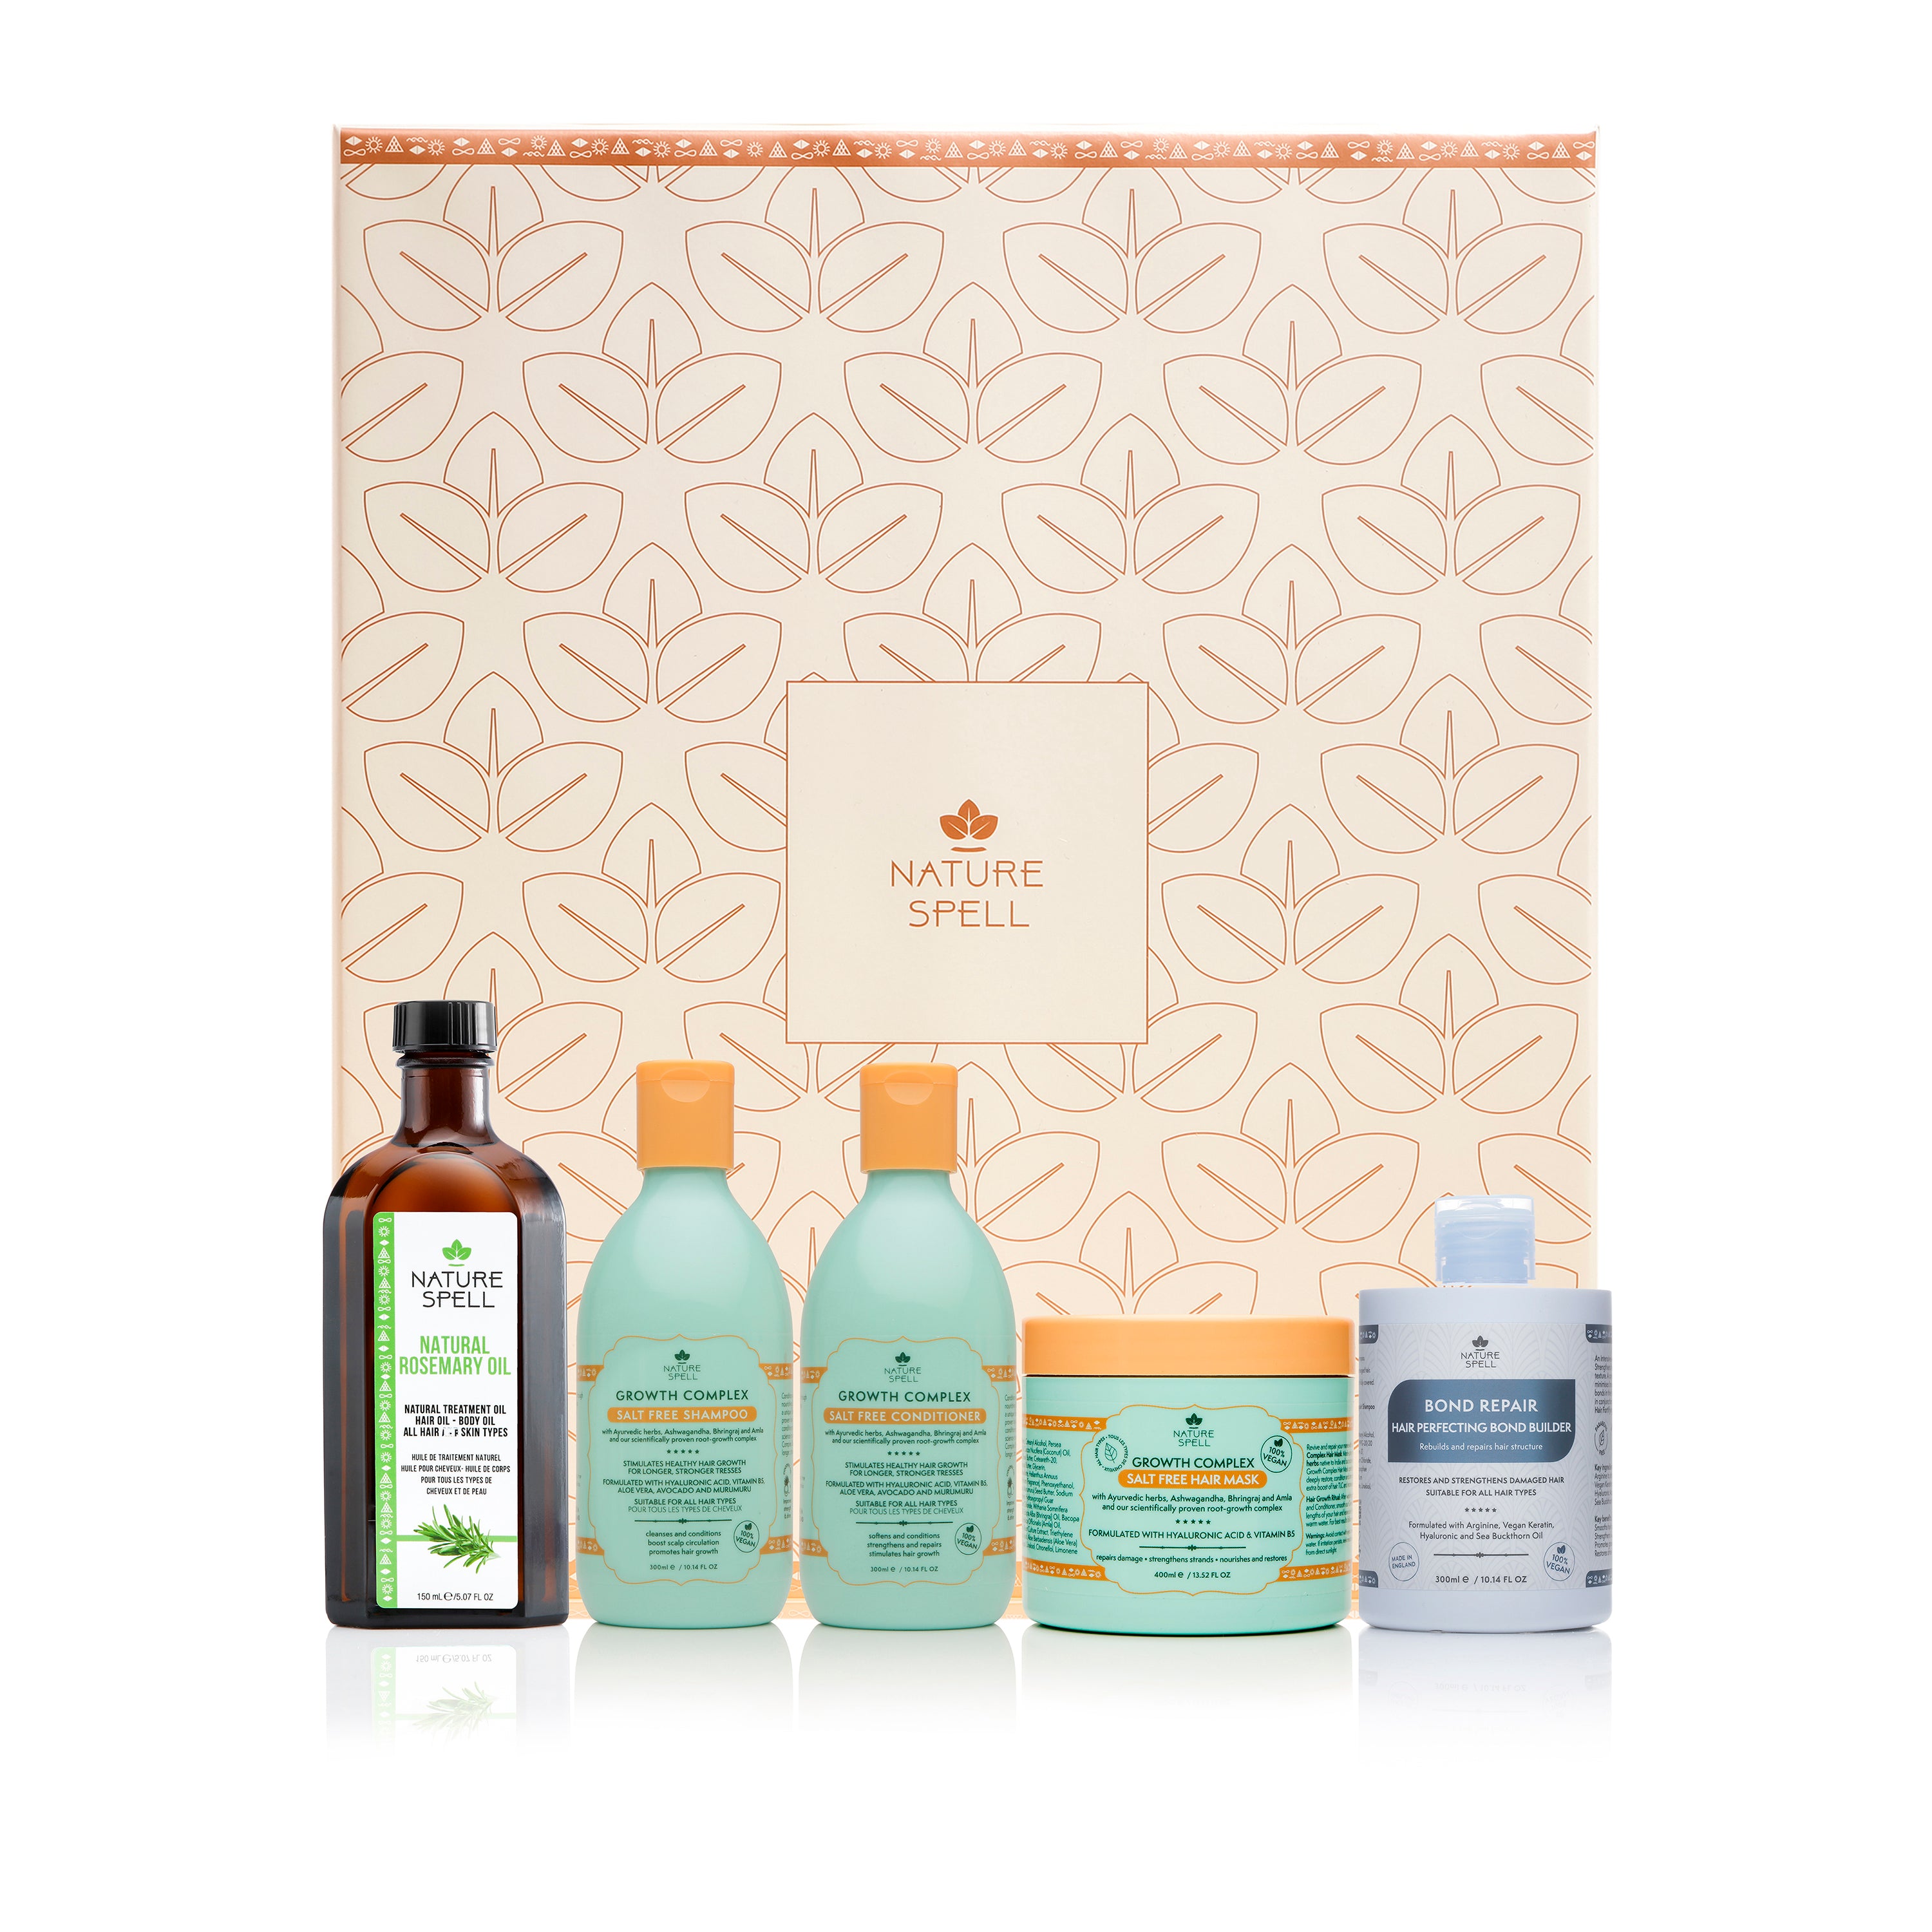 Haircare Heroes Gift Set - Your at-home hair salon experience